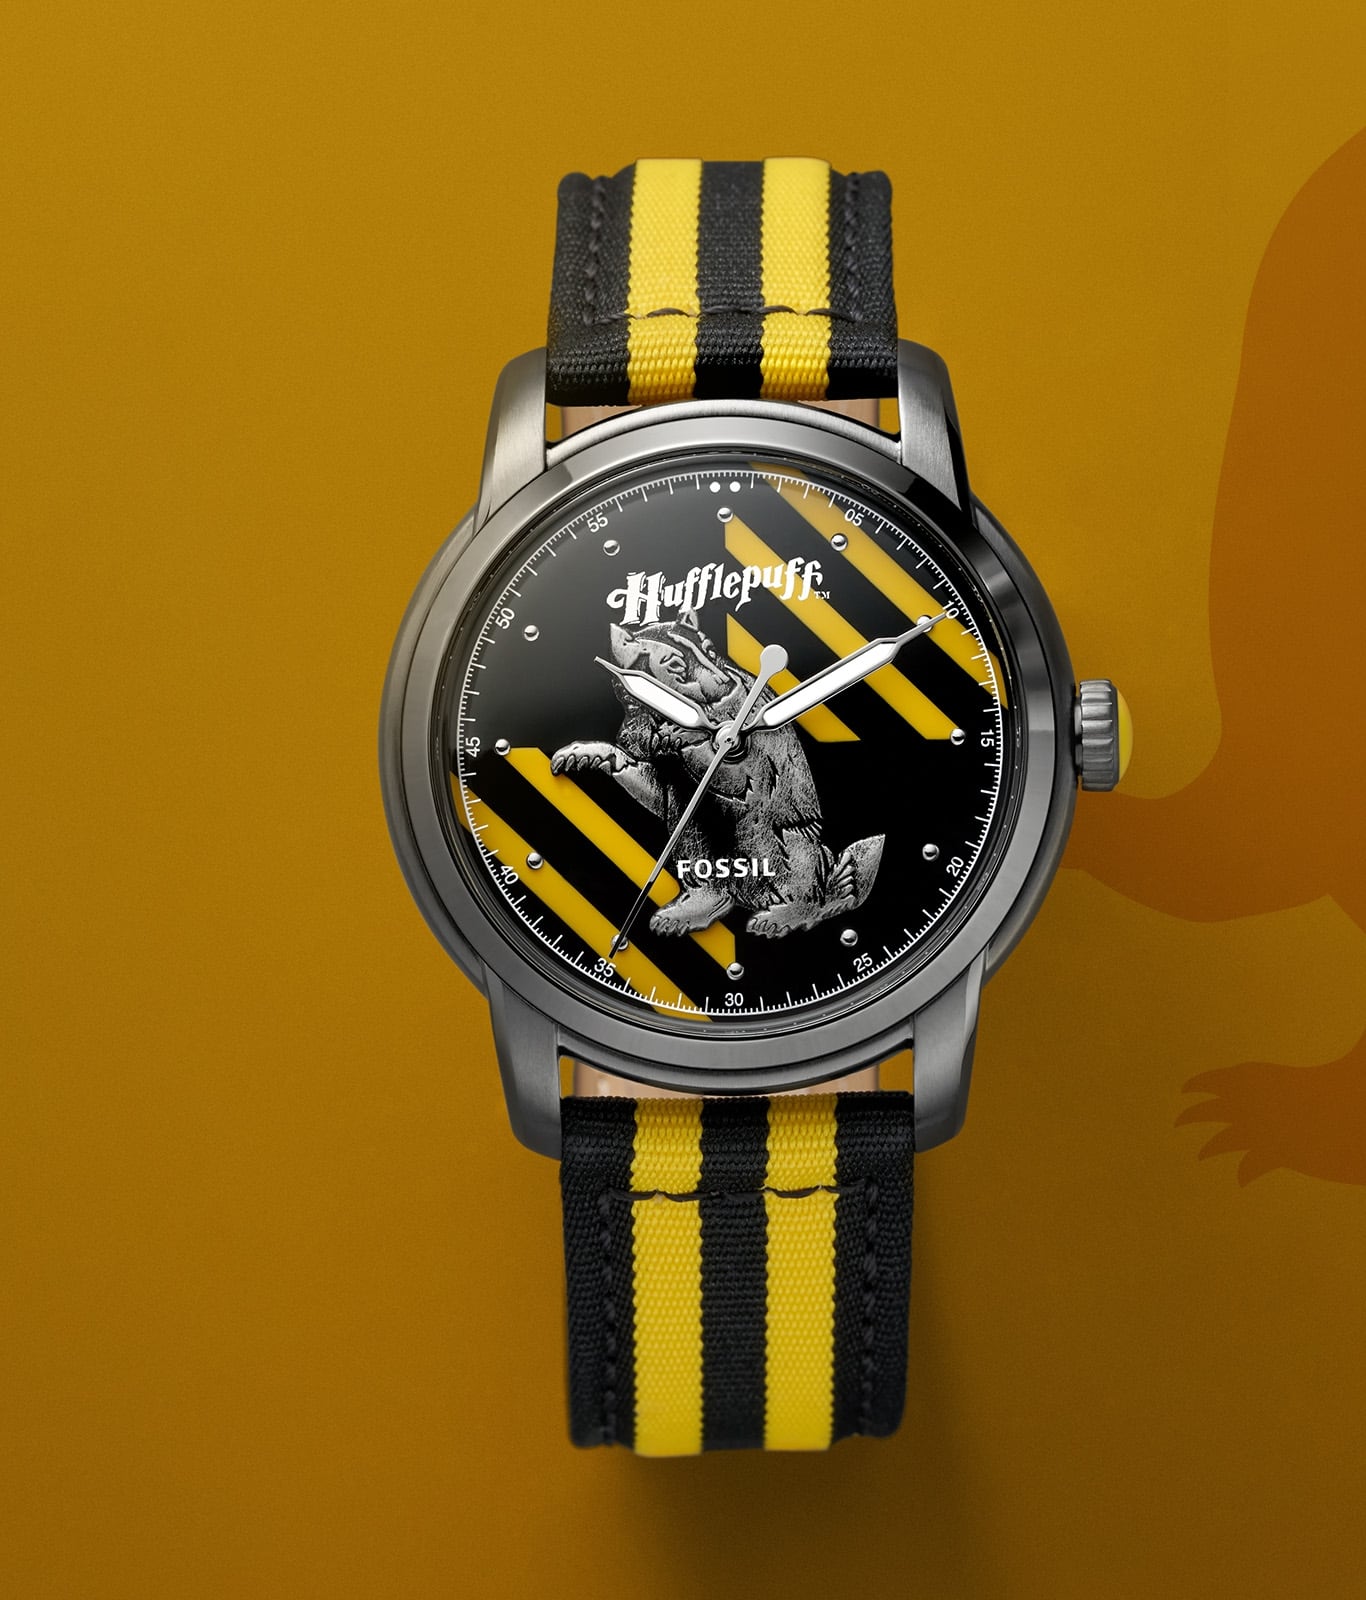 Silver-tone Hufflepuff house watch with a yellow and black strap.